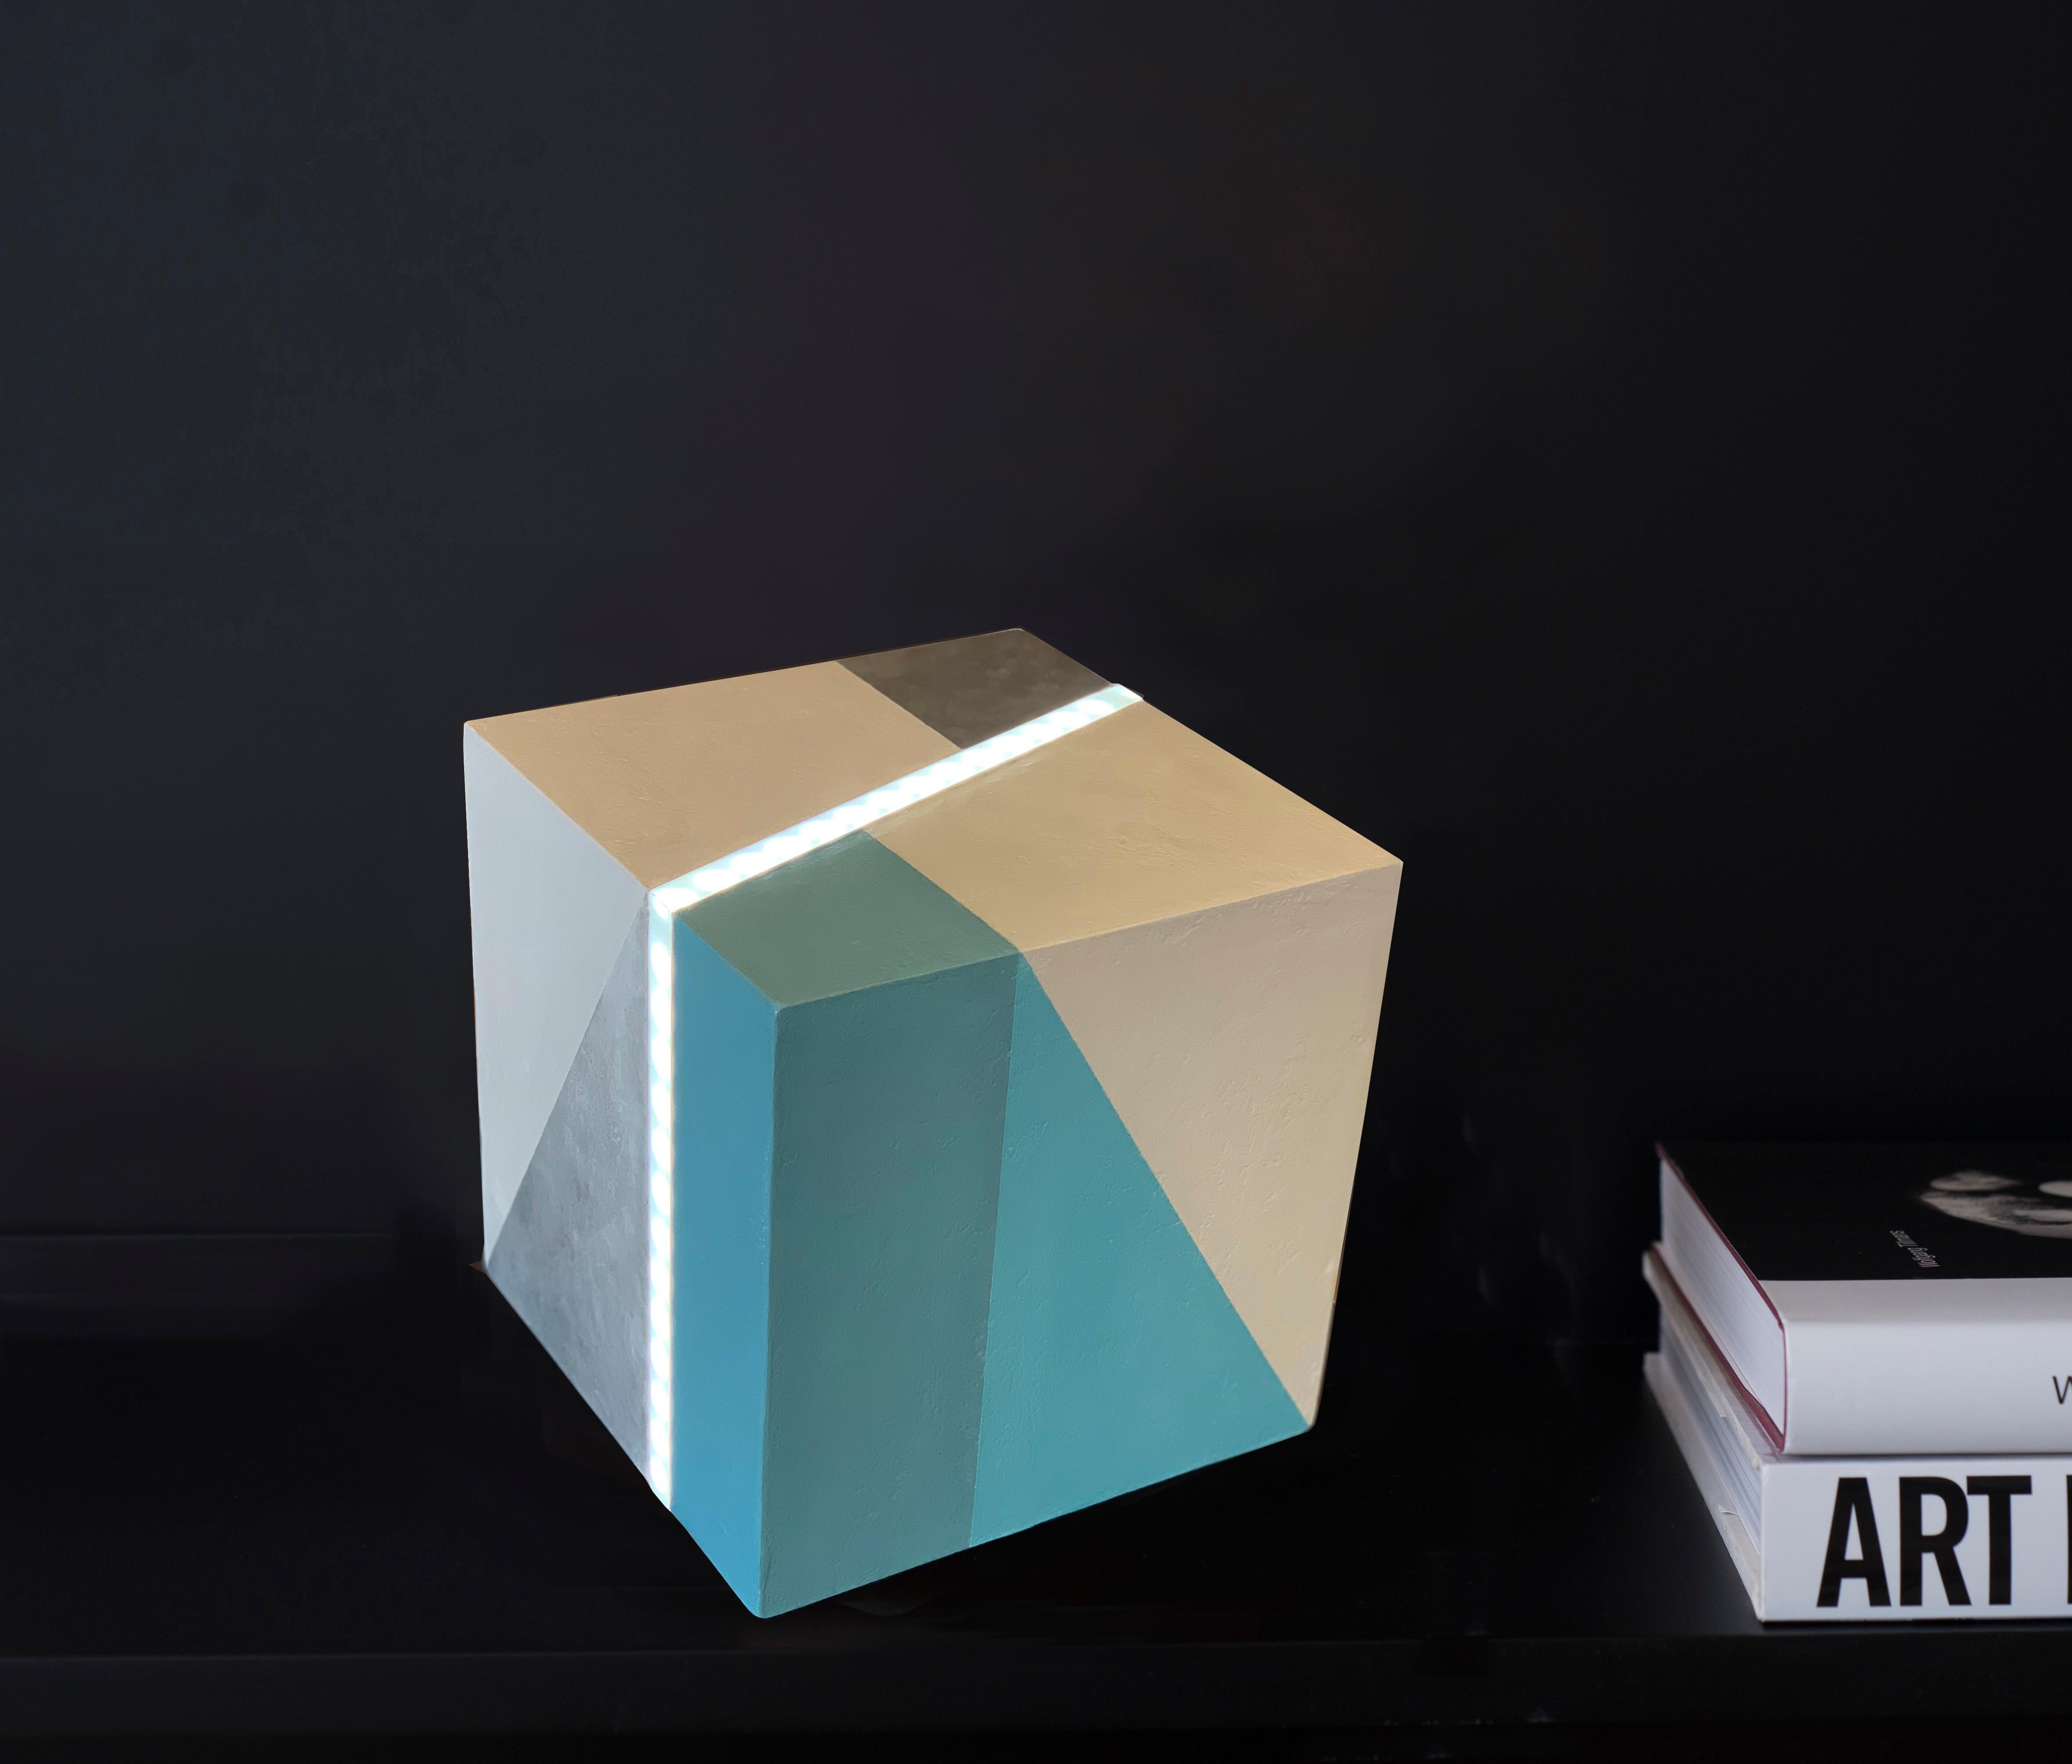 Cari Cohen Abstract Sculpture - Cube Led Light . Mixed media on wood with LED light